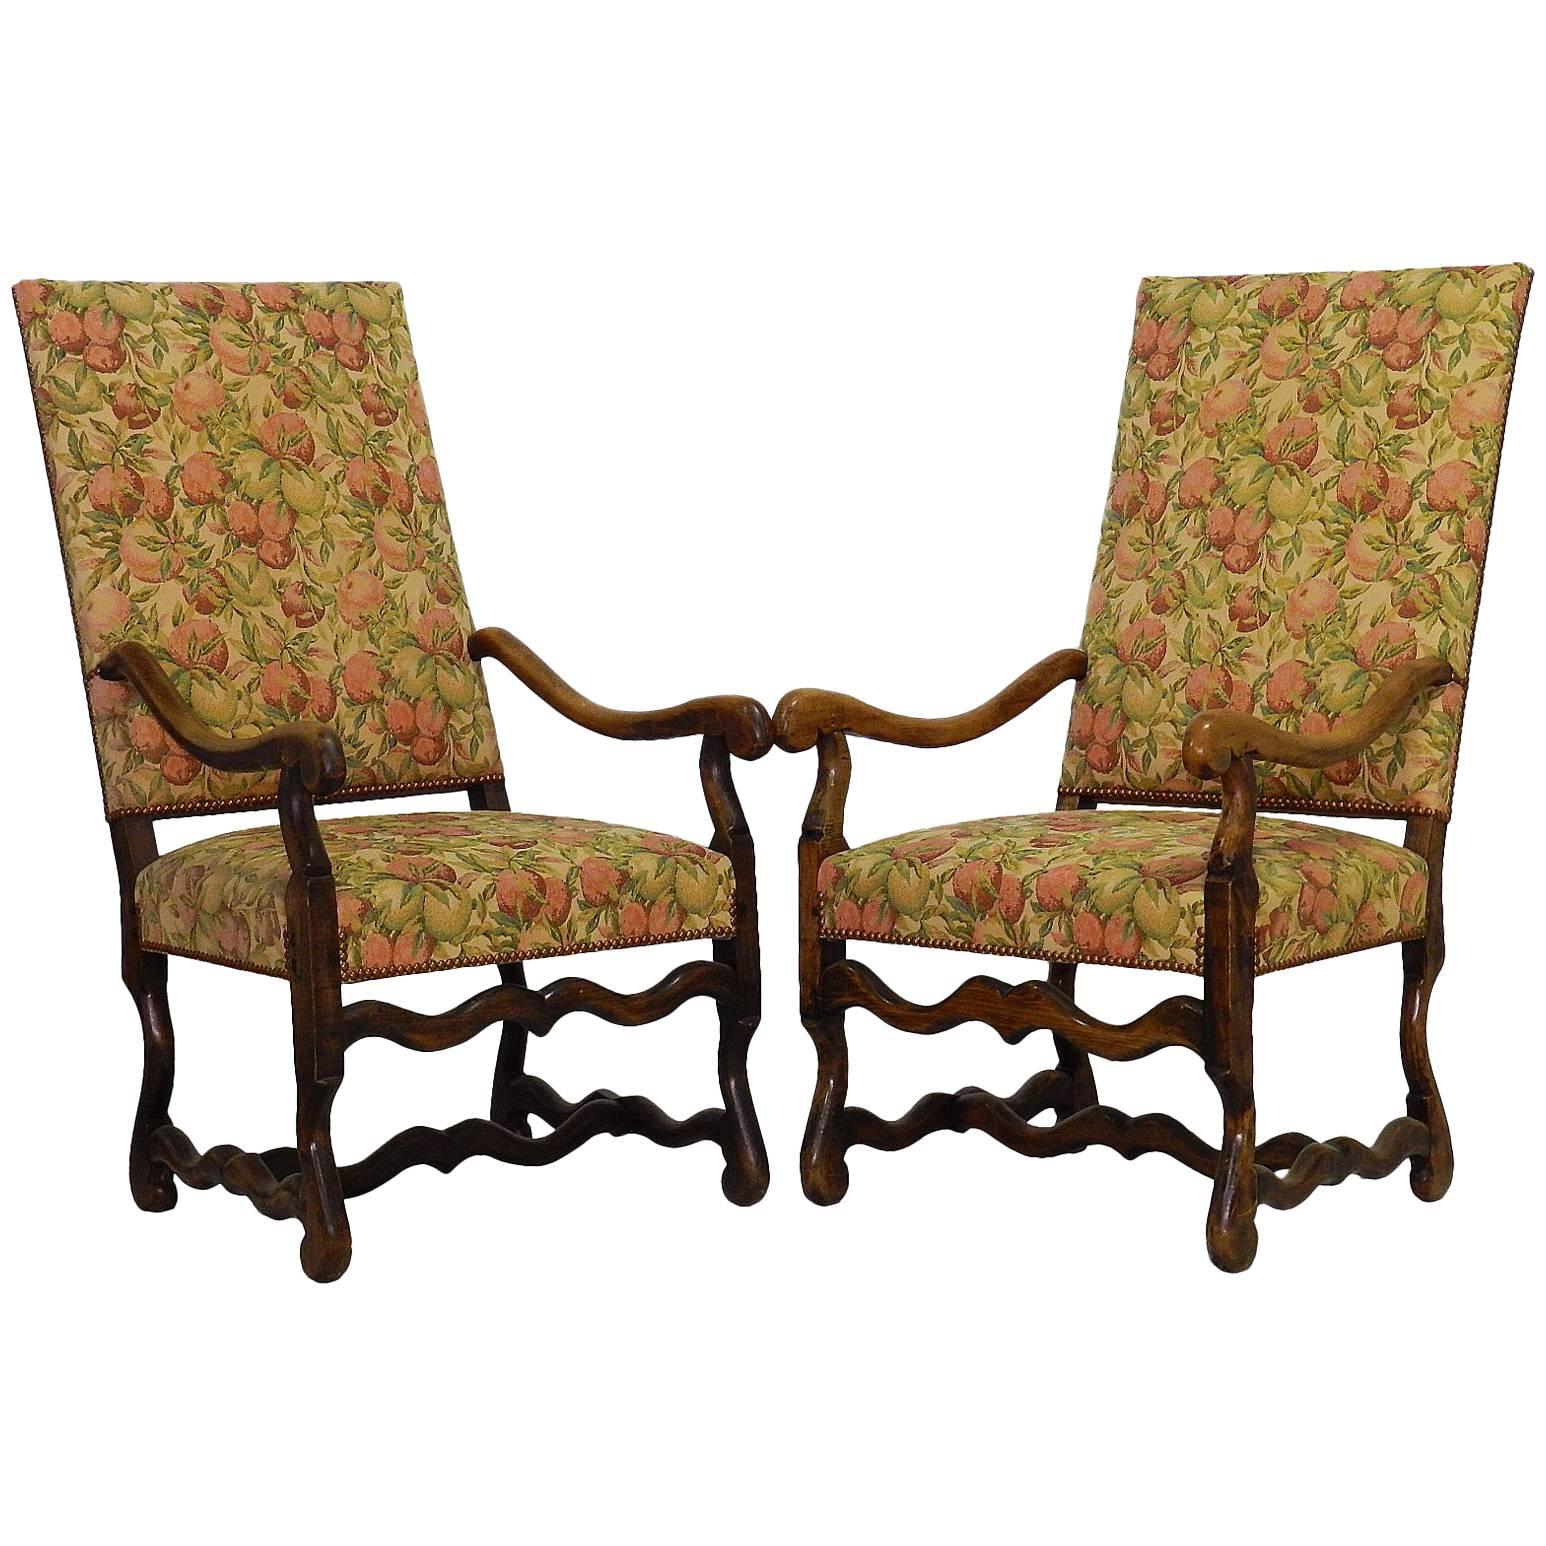 Pair Os de Mouton Armchairs French 19th century Throne Chairs Walnut FREE SHIP For Sale